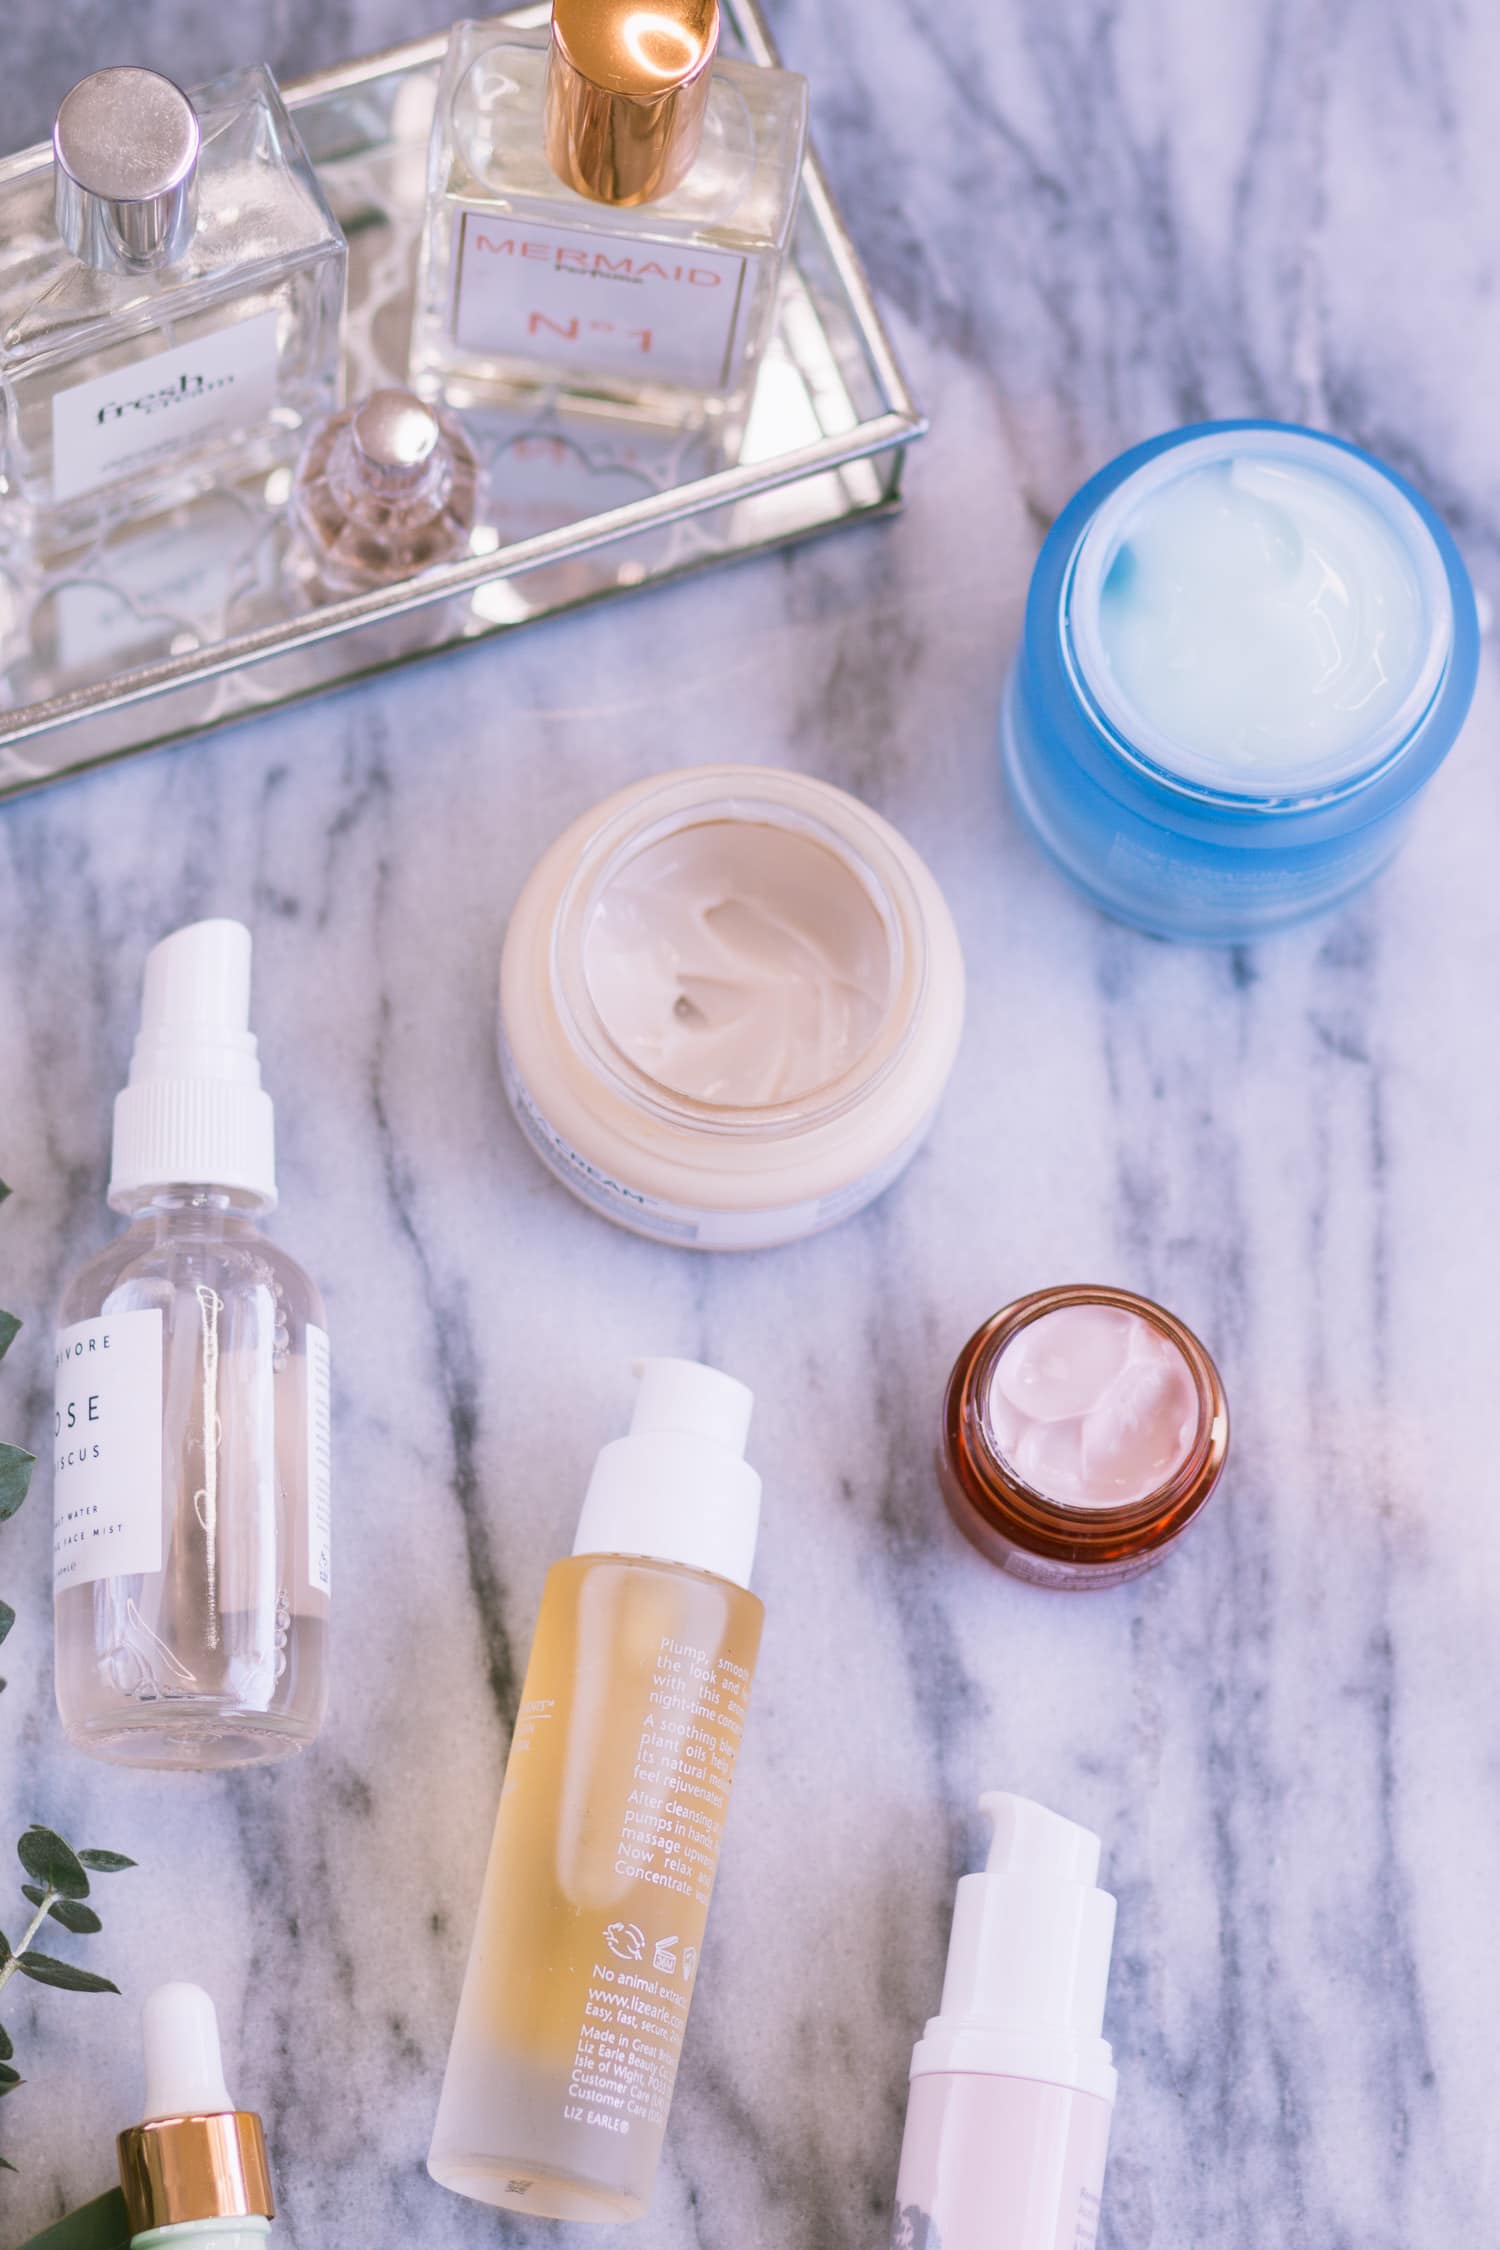 how-to-update-your-fall-skincare-routine-beauty-blogger-ashley-brooke-nicholas-9561-2